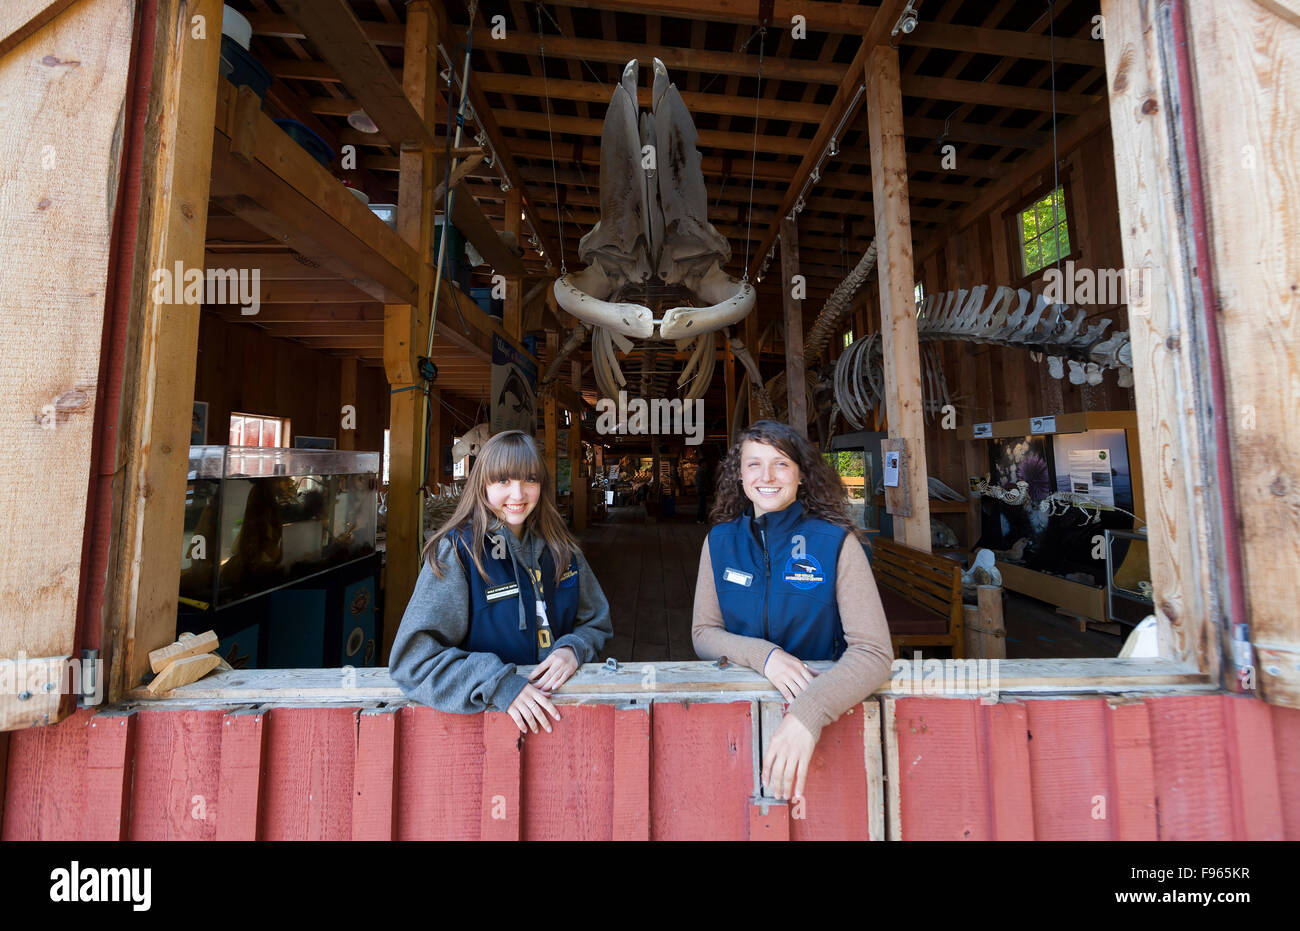 Volunteers staff the popular whale museum with its distinctive fin whale skeleton throughout the summer months at Telegraph Stock Photo